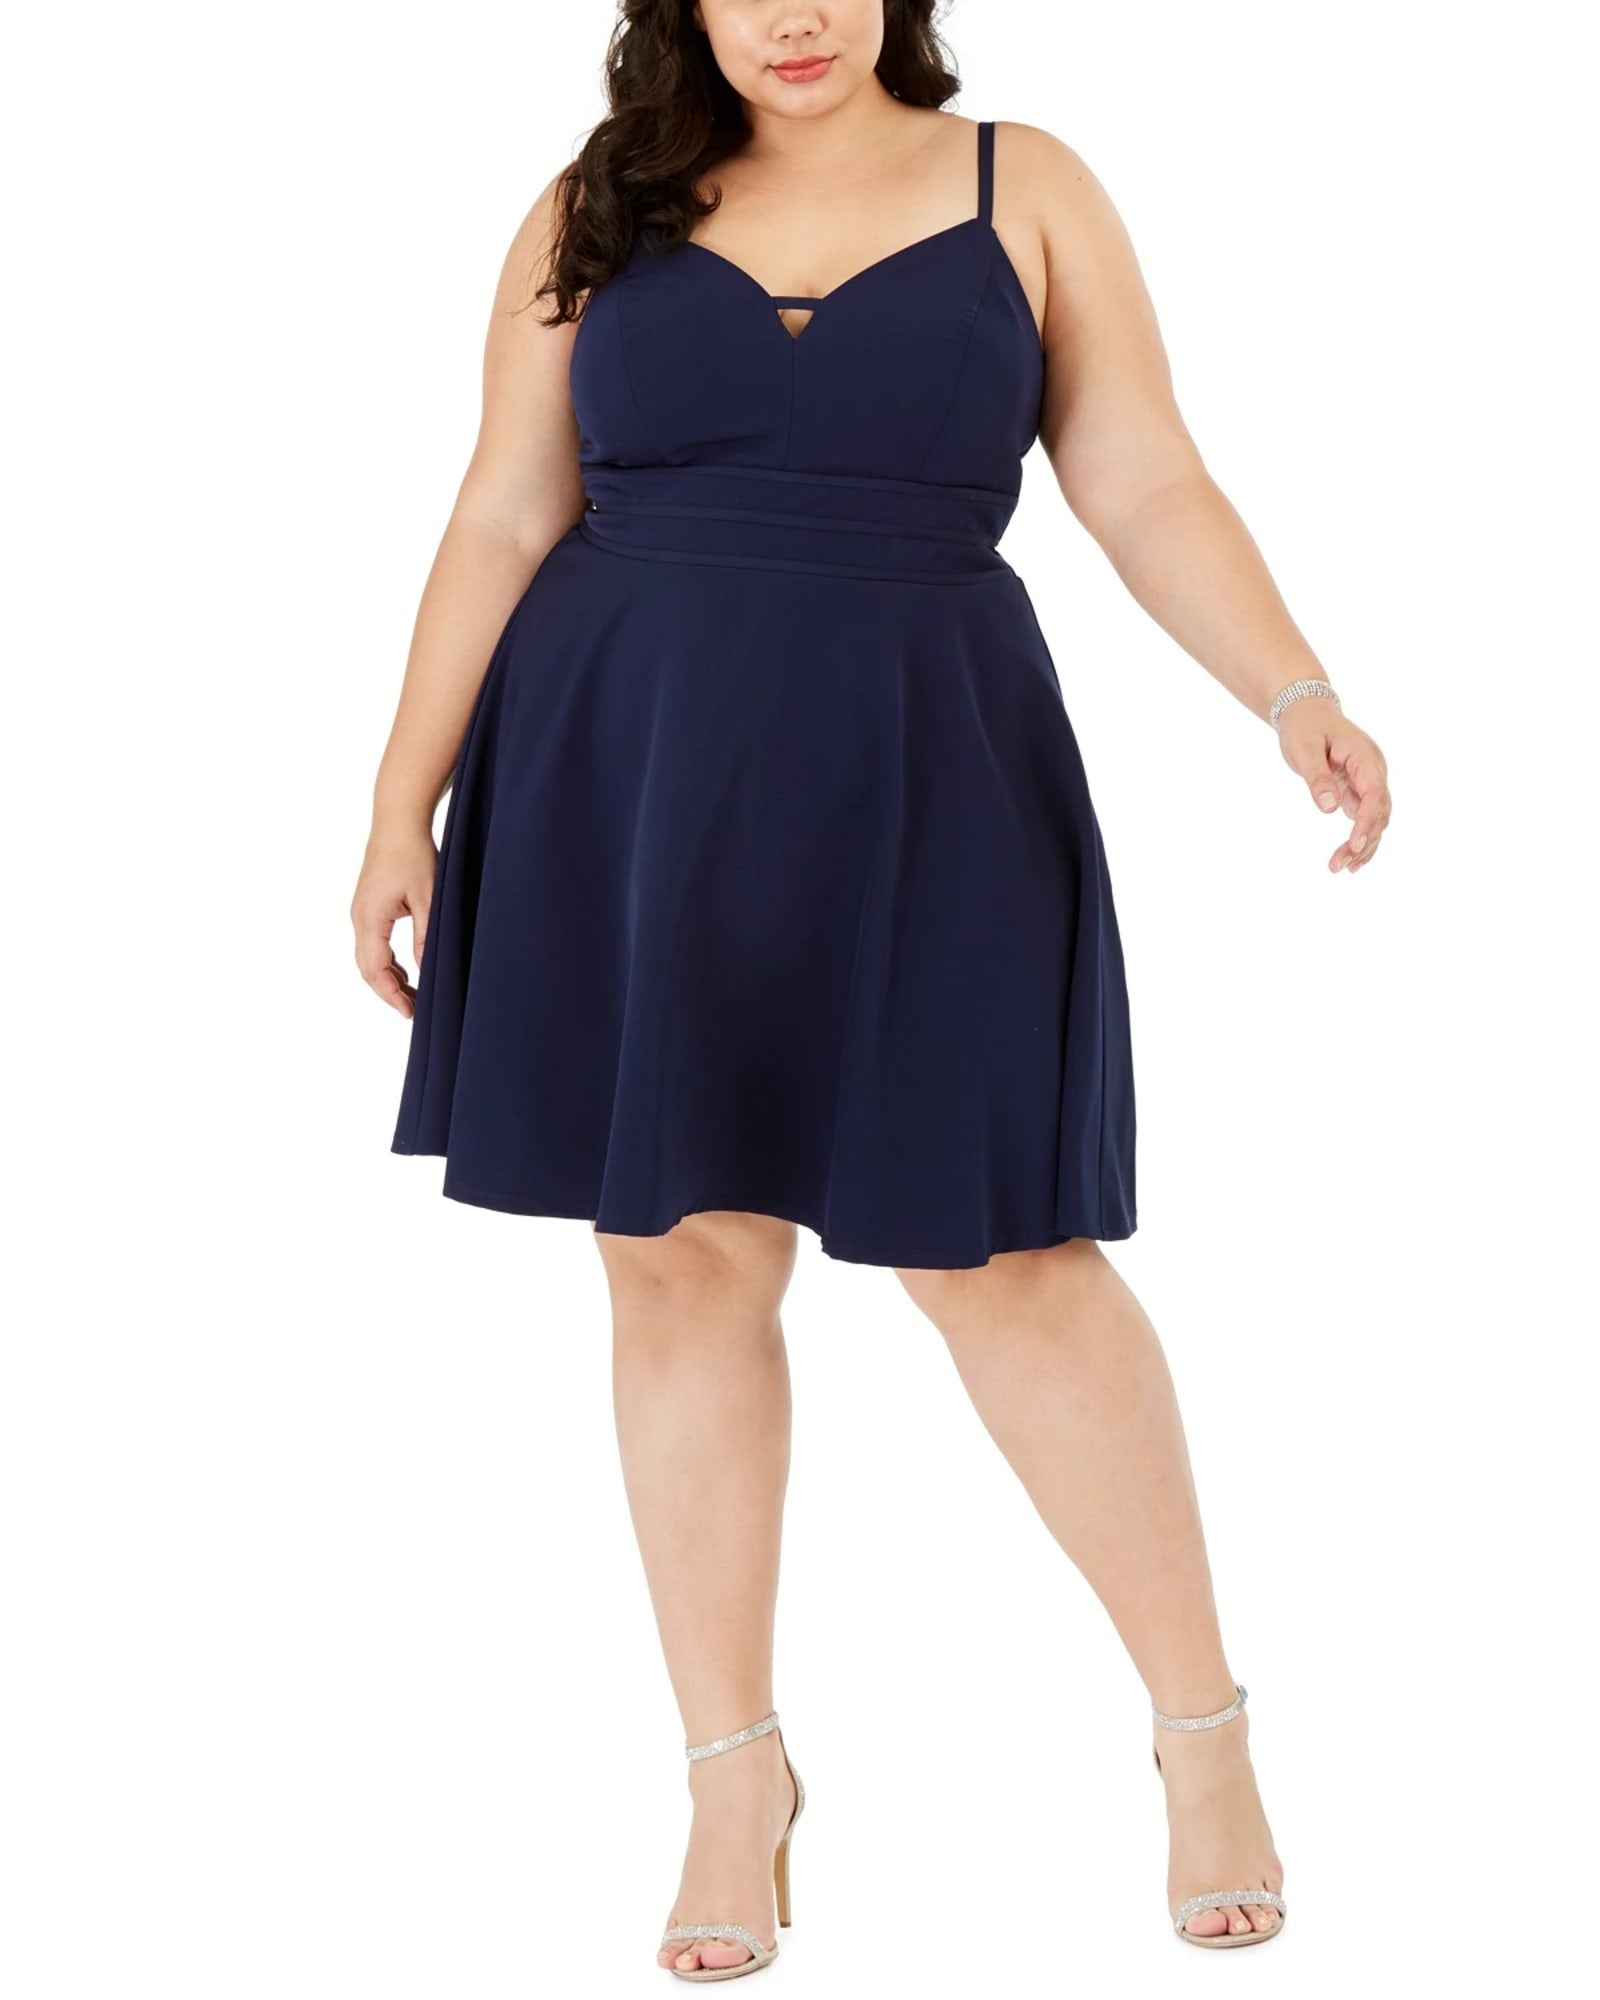 How To Pair Plus-Size Shapewear with Your Favorite Dress - Dia & Co